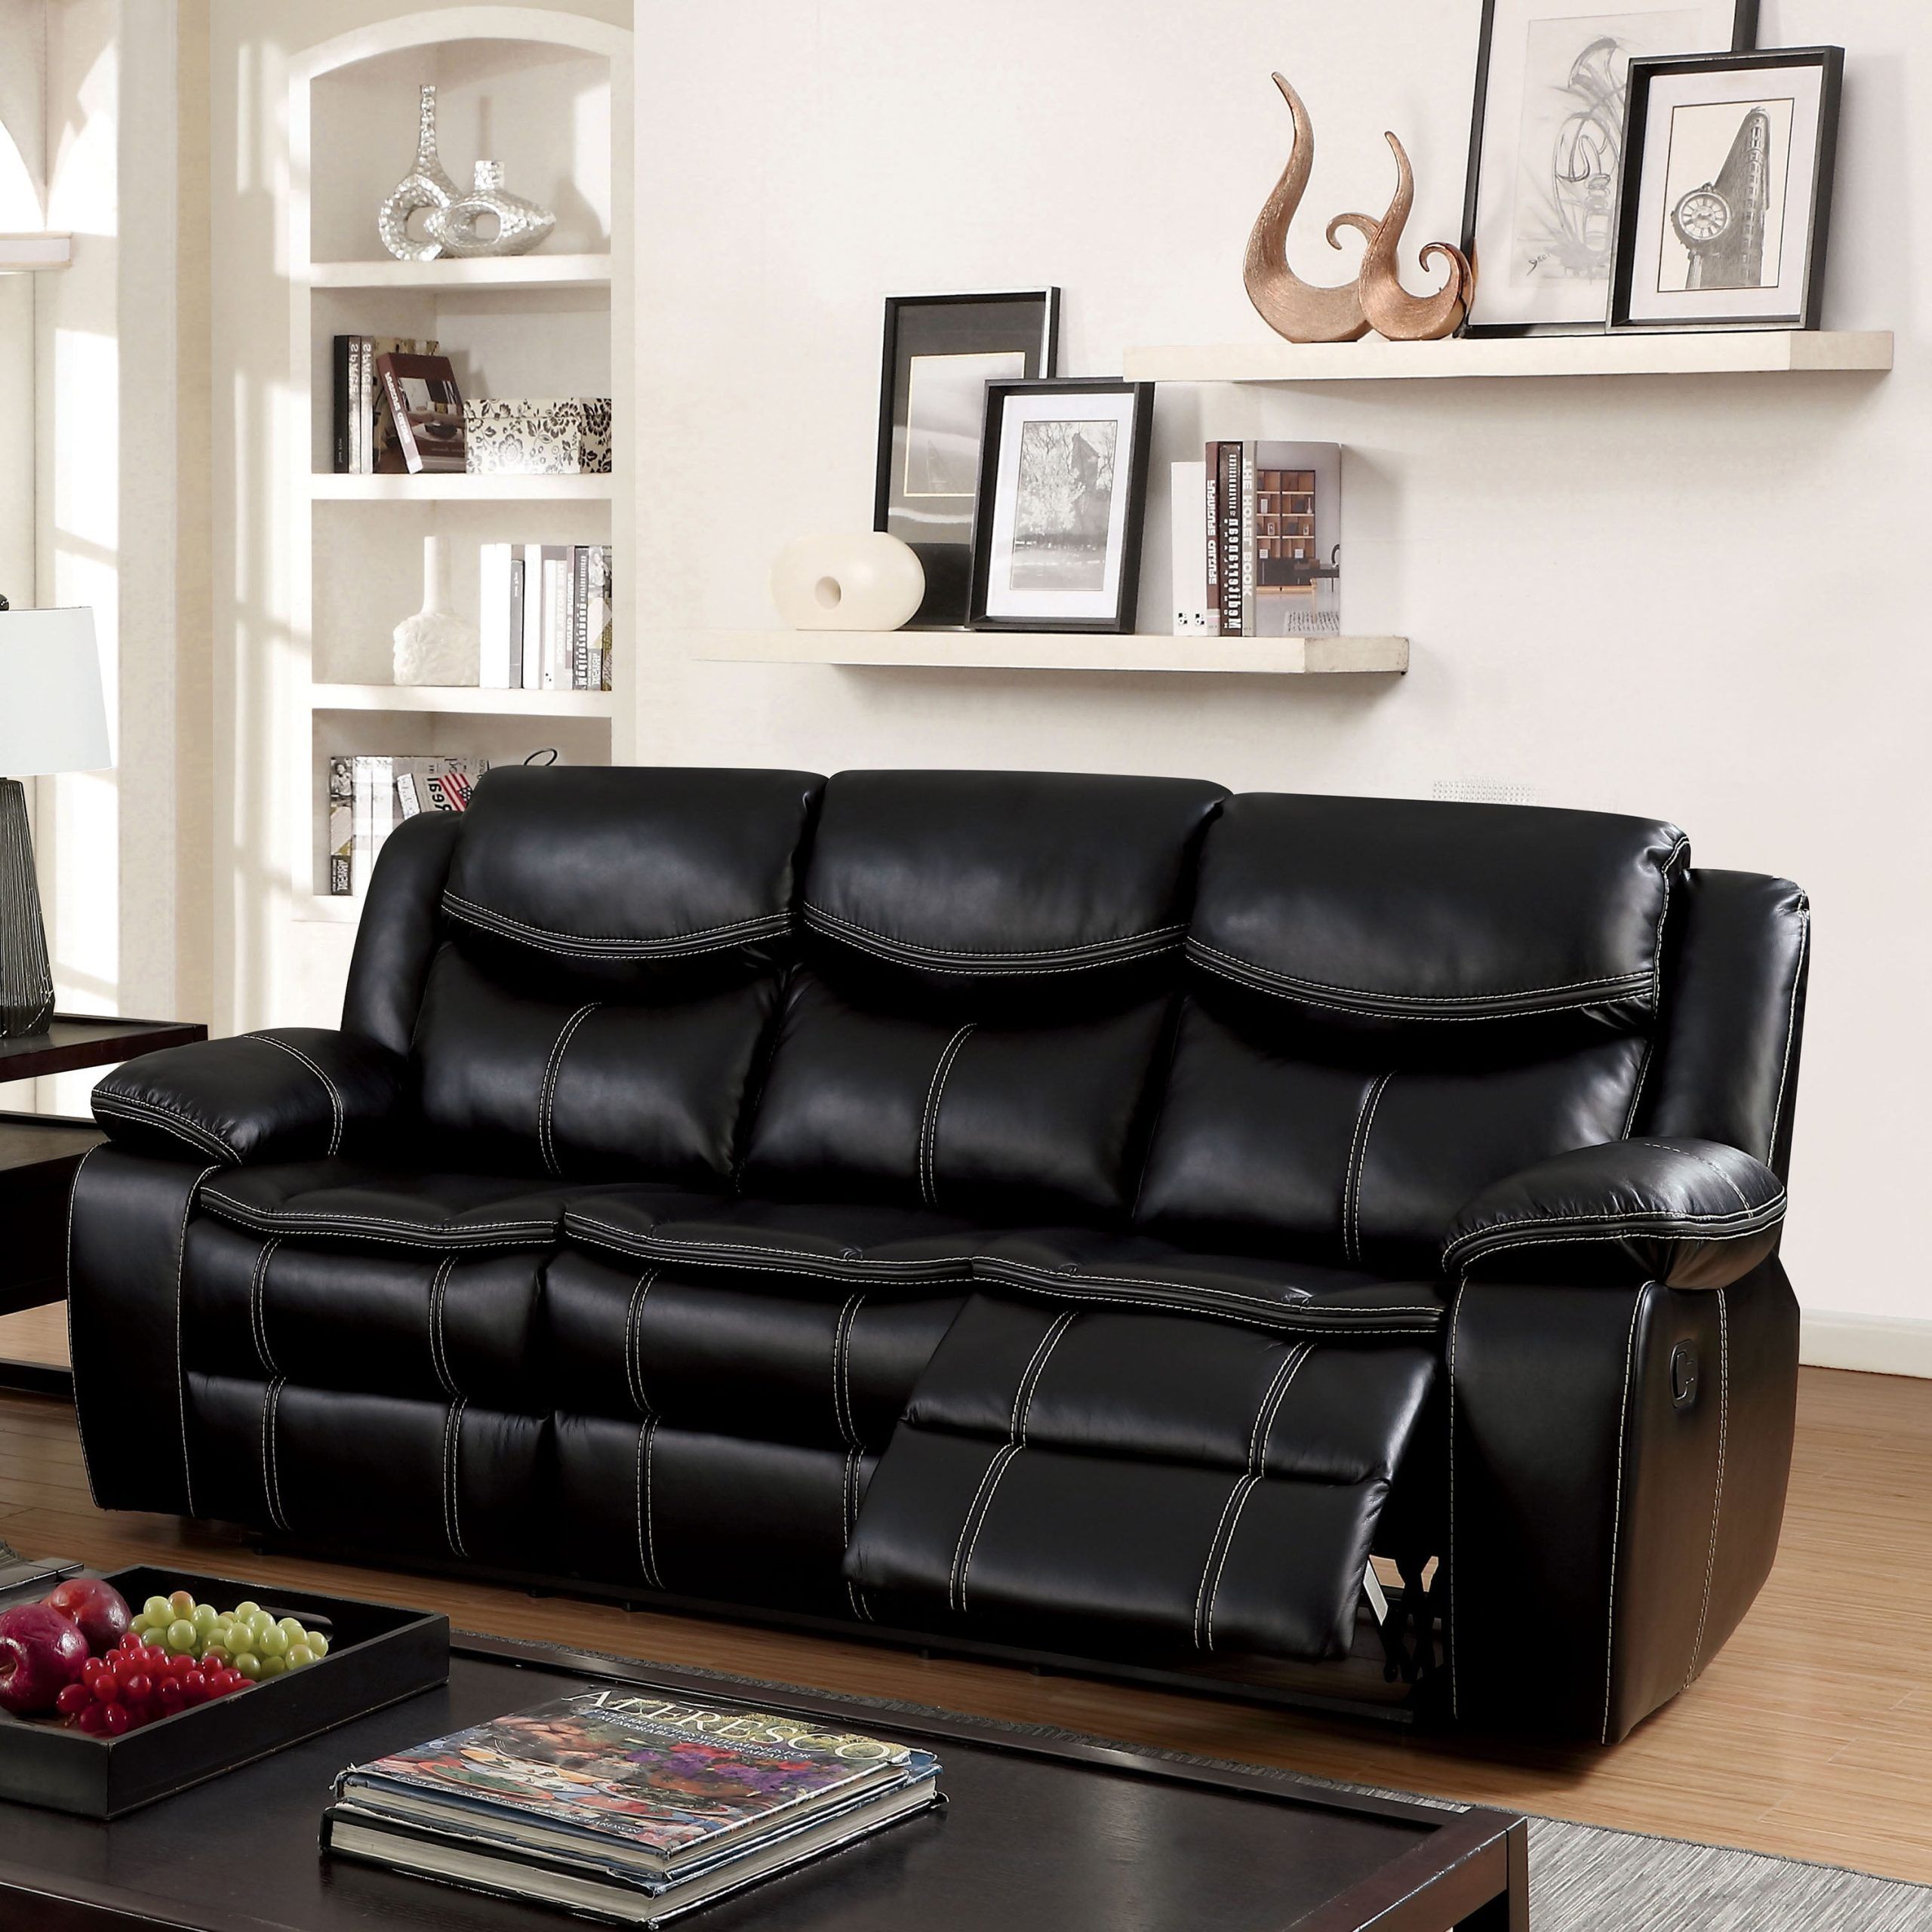 Furniture Of America Transitional Faux Leather Judson Reclining Sofa Intended For Right Facing Black Sofas (View 16 of 20)